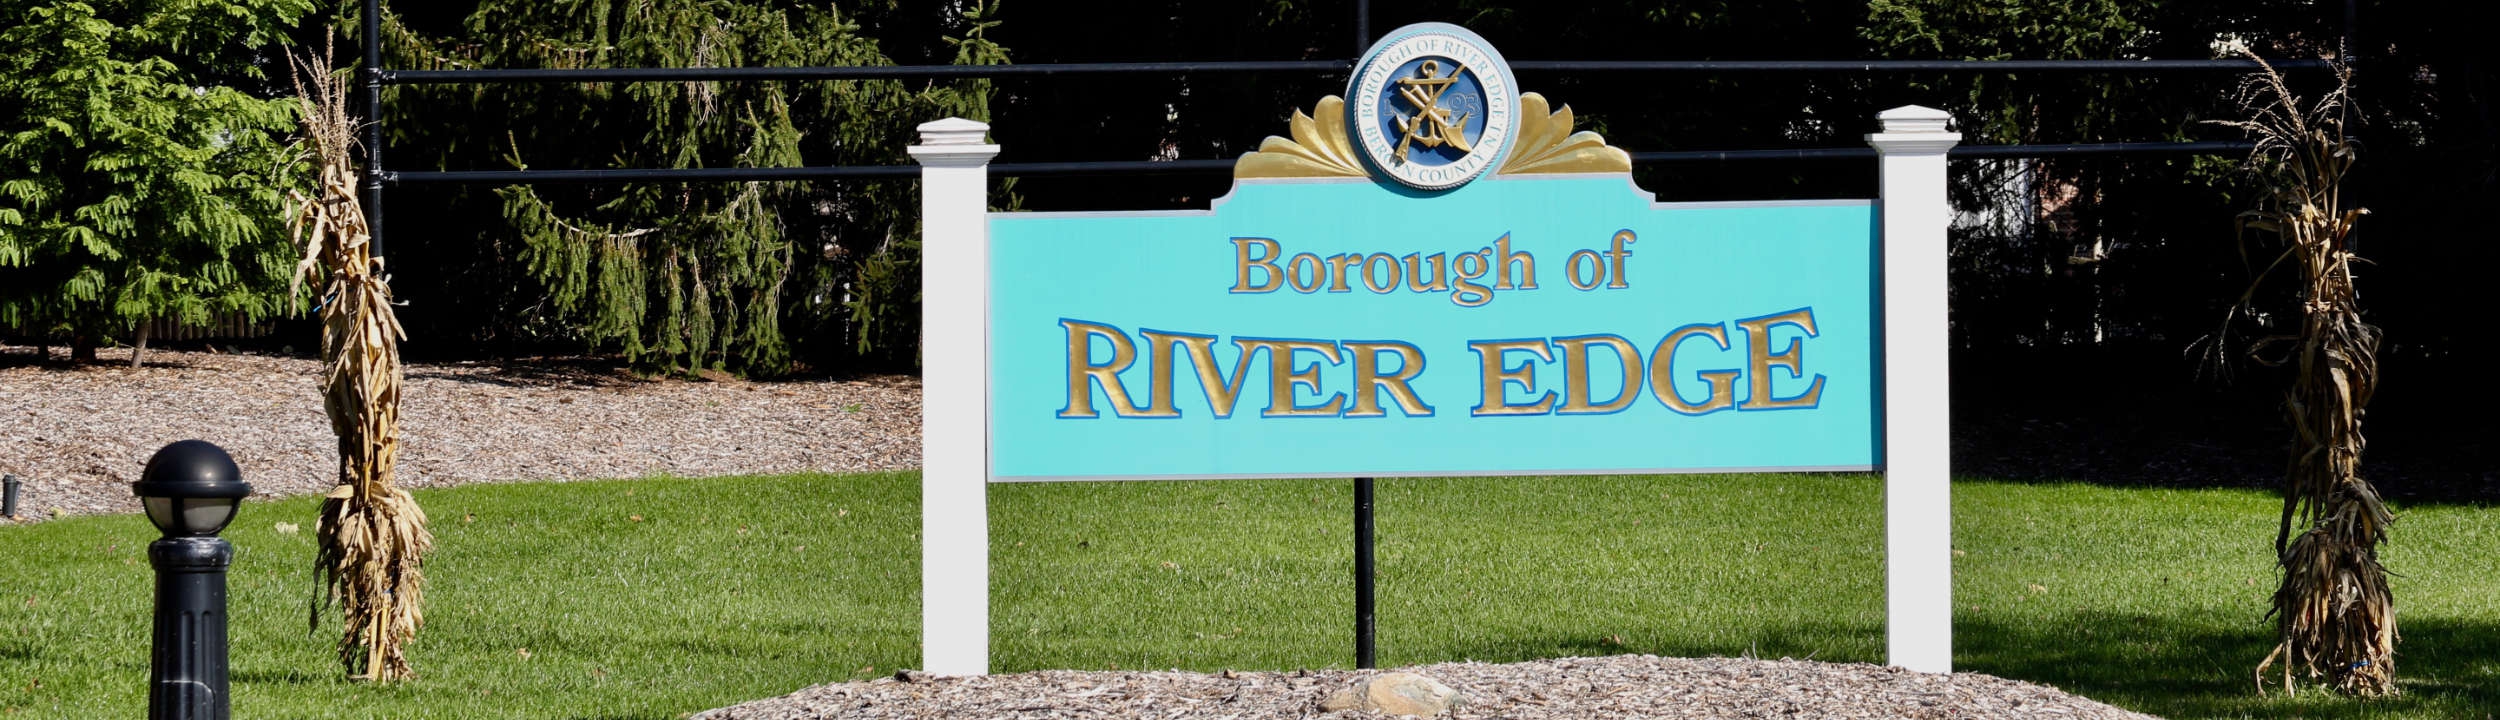 Borough of River Edge, New Jersey sign.